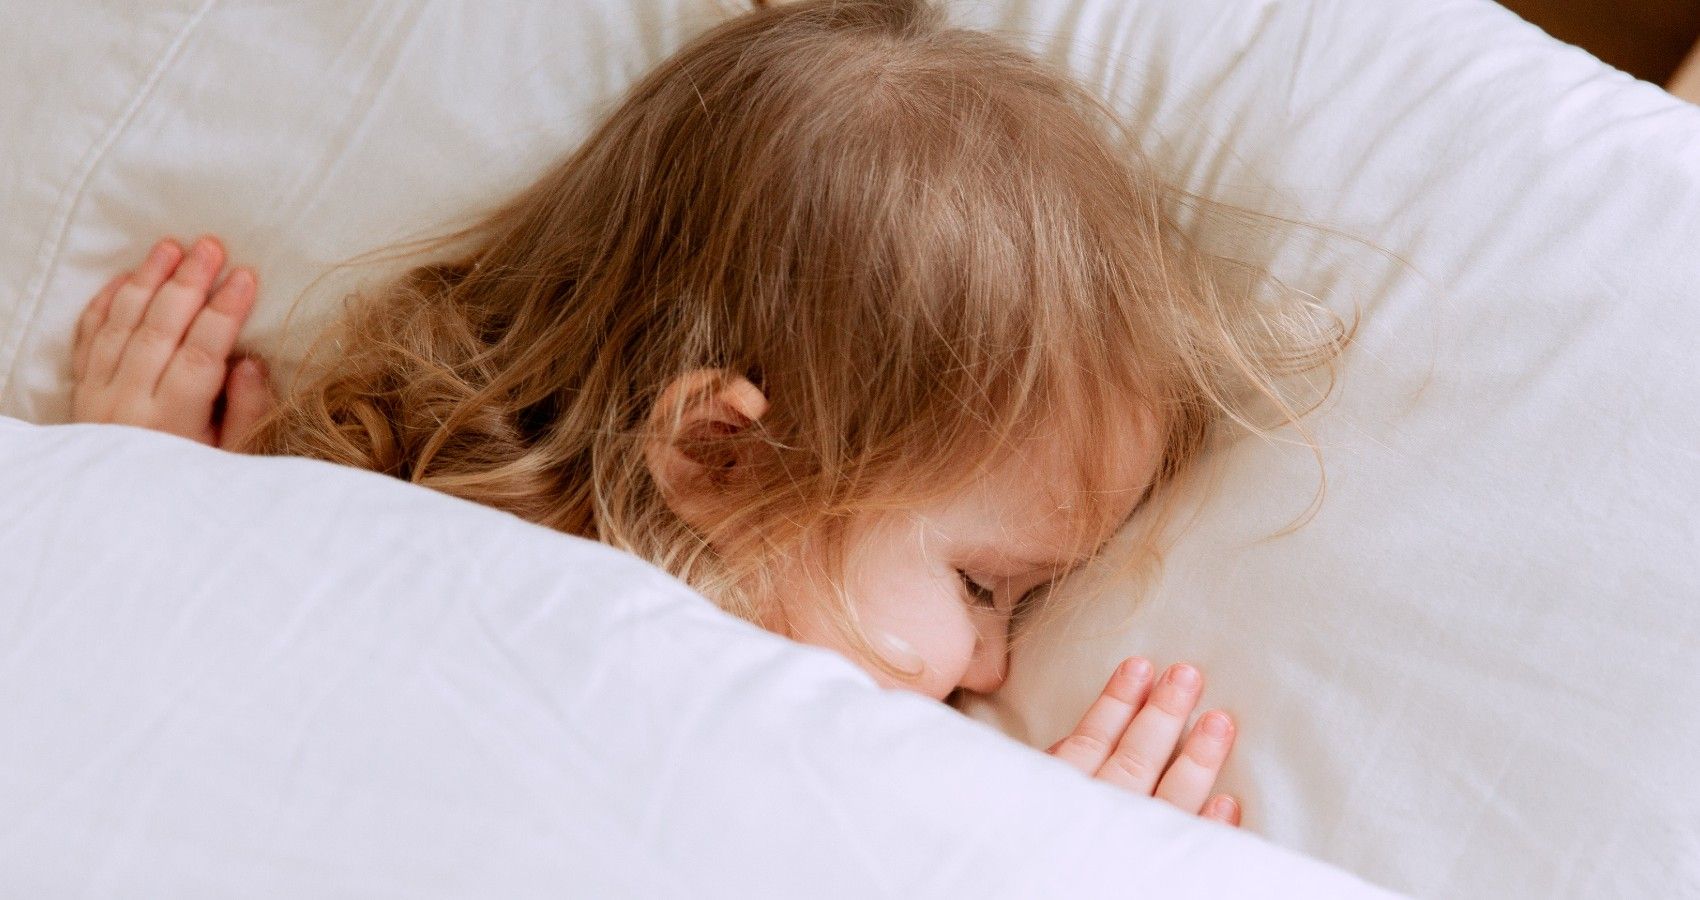 A small child sleeping in a bed